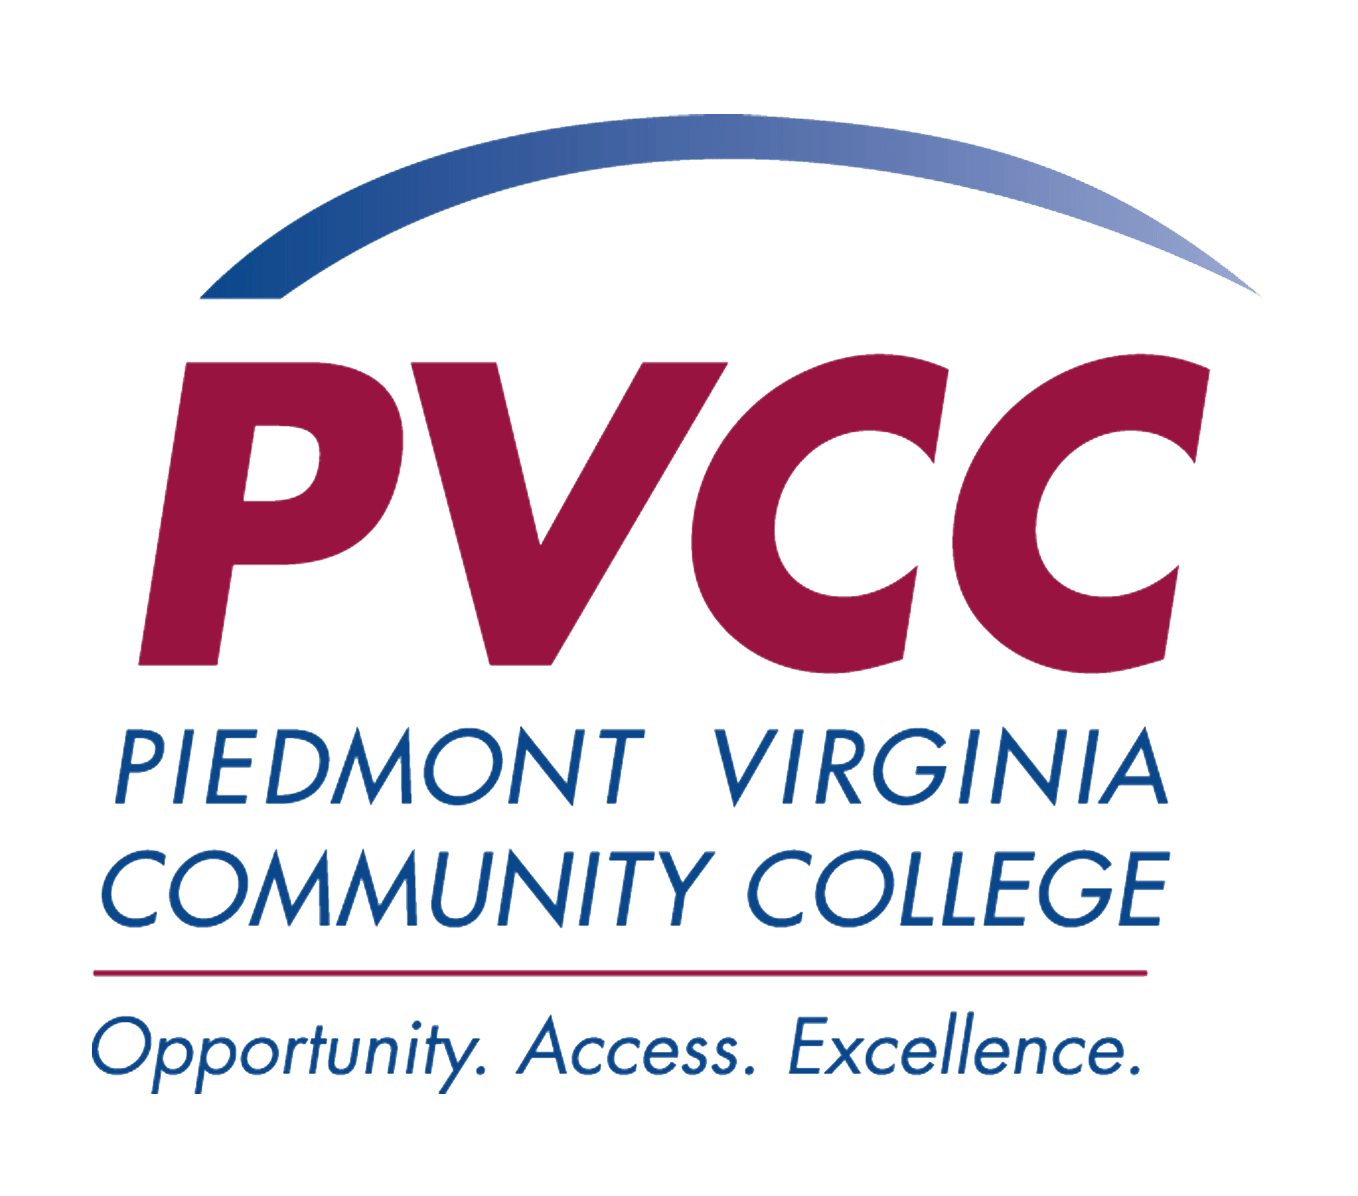 PVCC Logo - Piedmont Virginia Community College | Opportunity Access Excellence